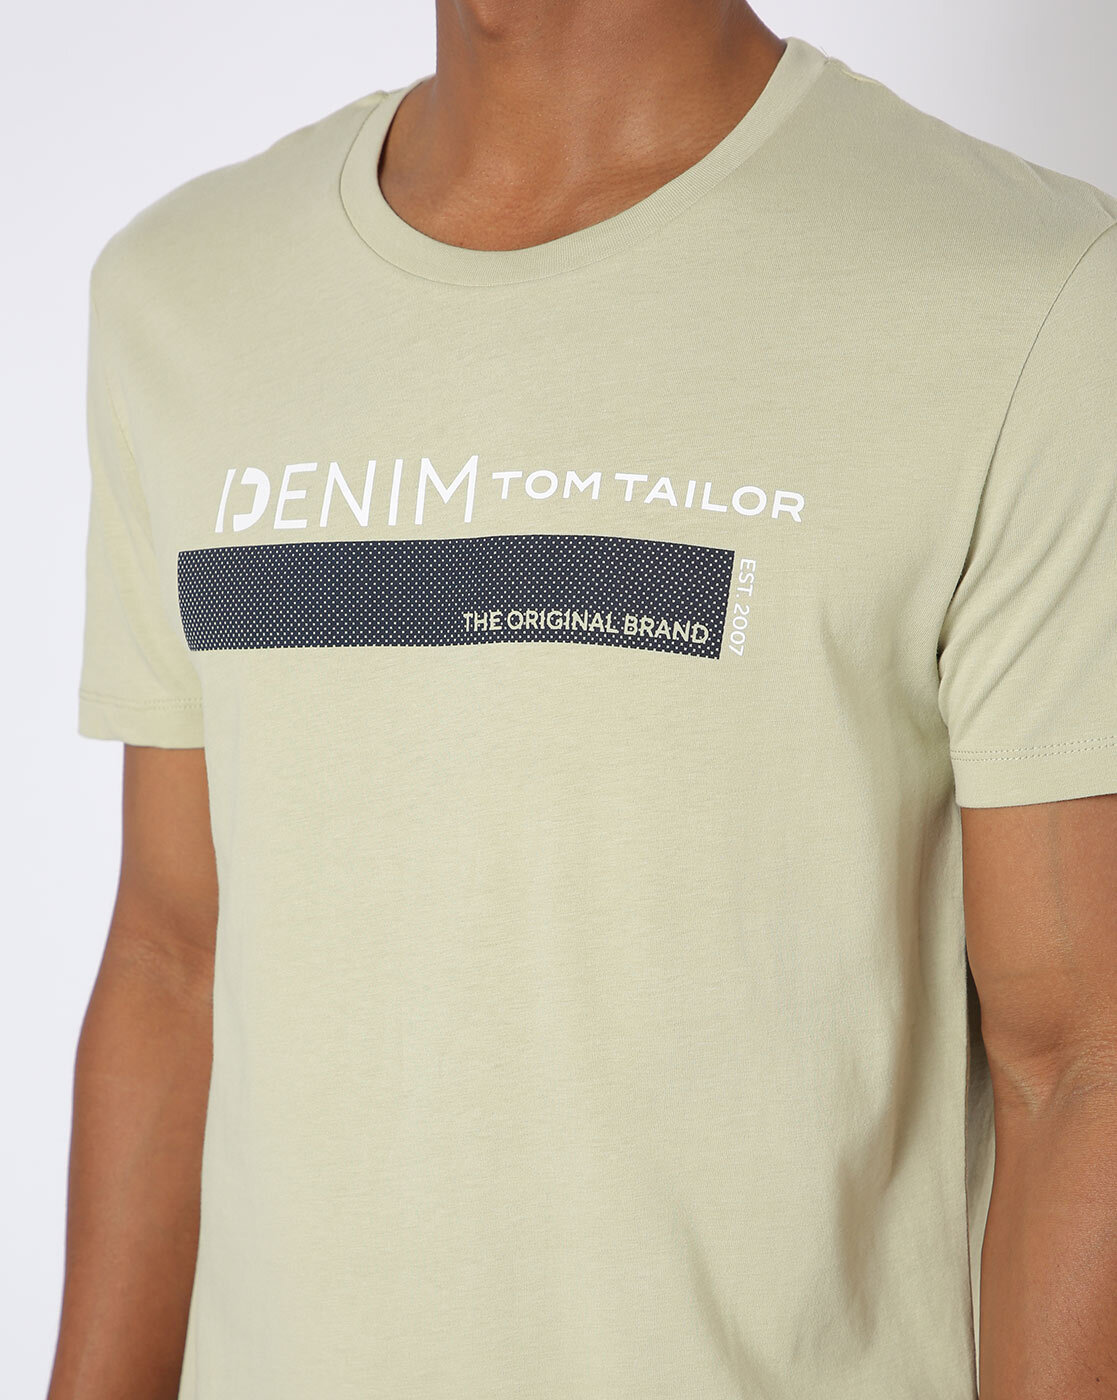 Online Buy Tom Tailor by Green Men for Tshirts